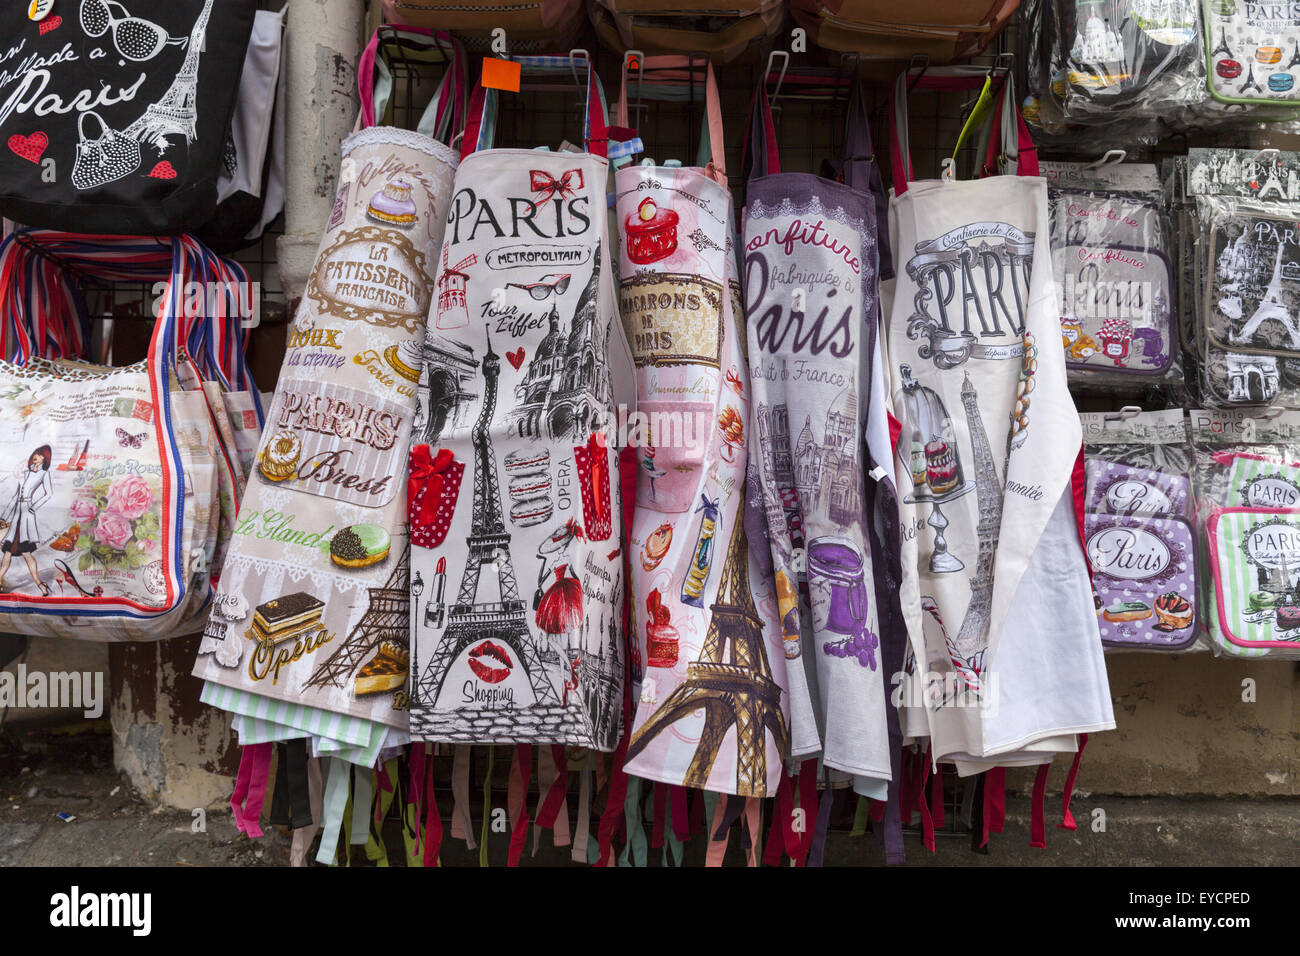 Paris souvenir aprons, bags and other products displayed outside gift shop in Montmartre, Paris Stock Photo